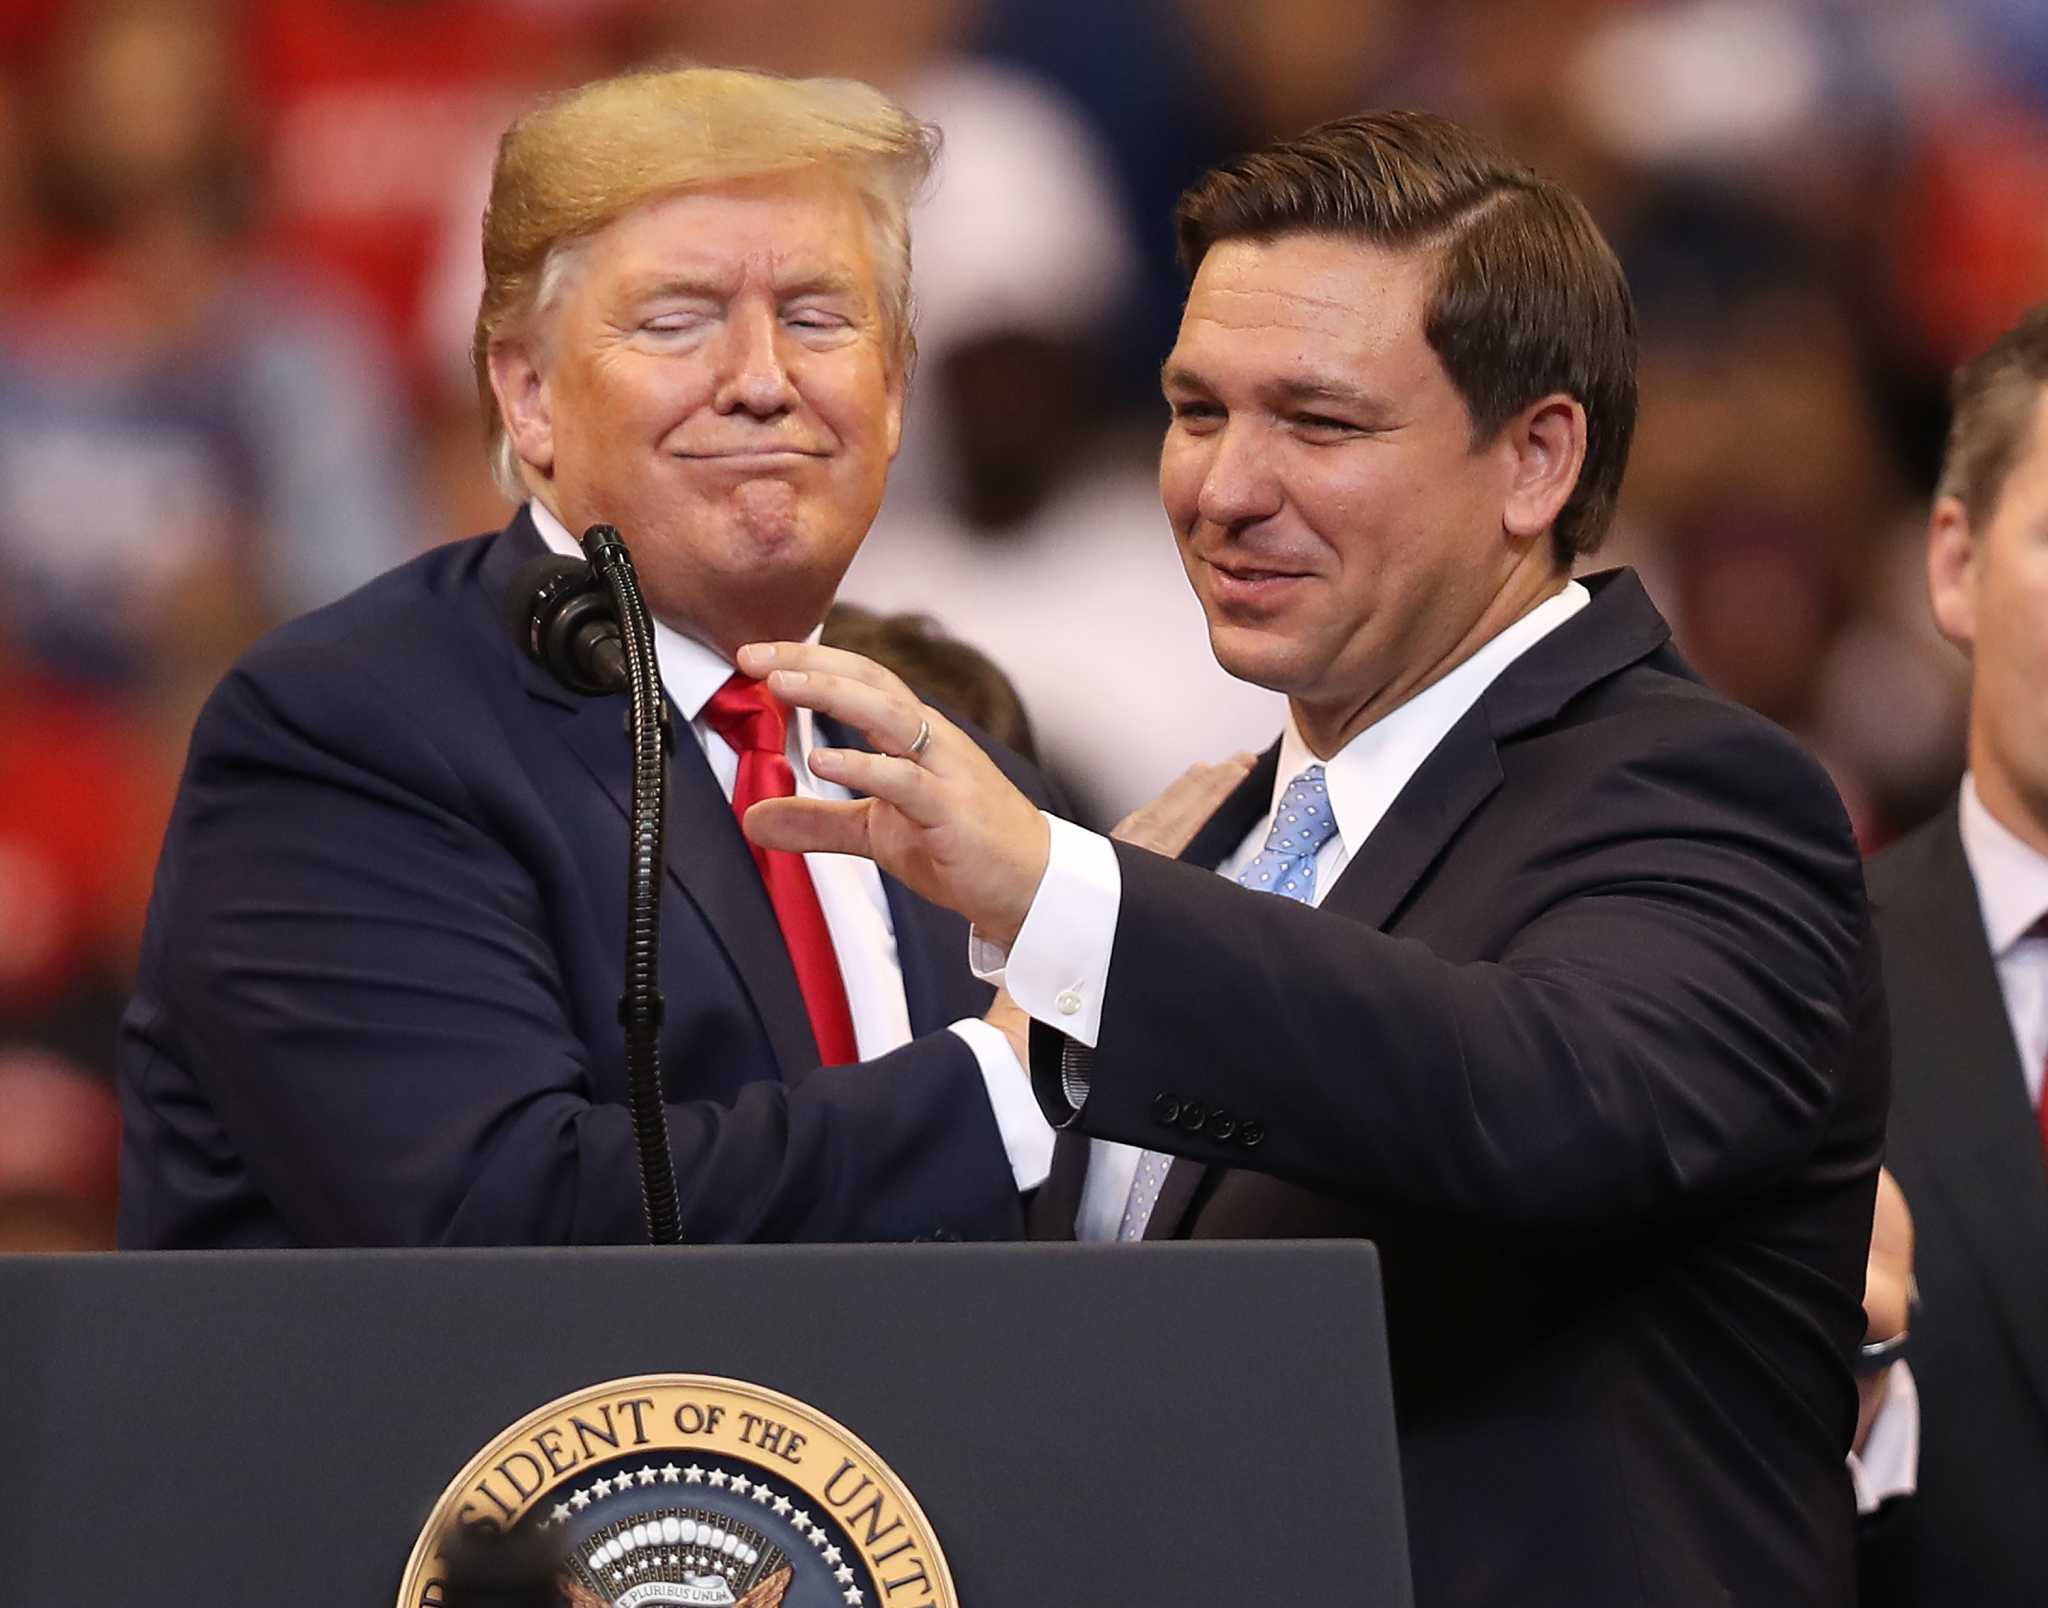 Who Is King of Florida? Tensions Rise Between Trump and a Former Acolyte